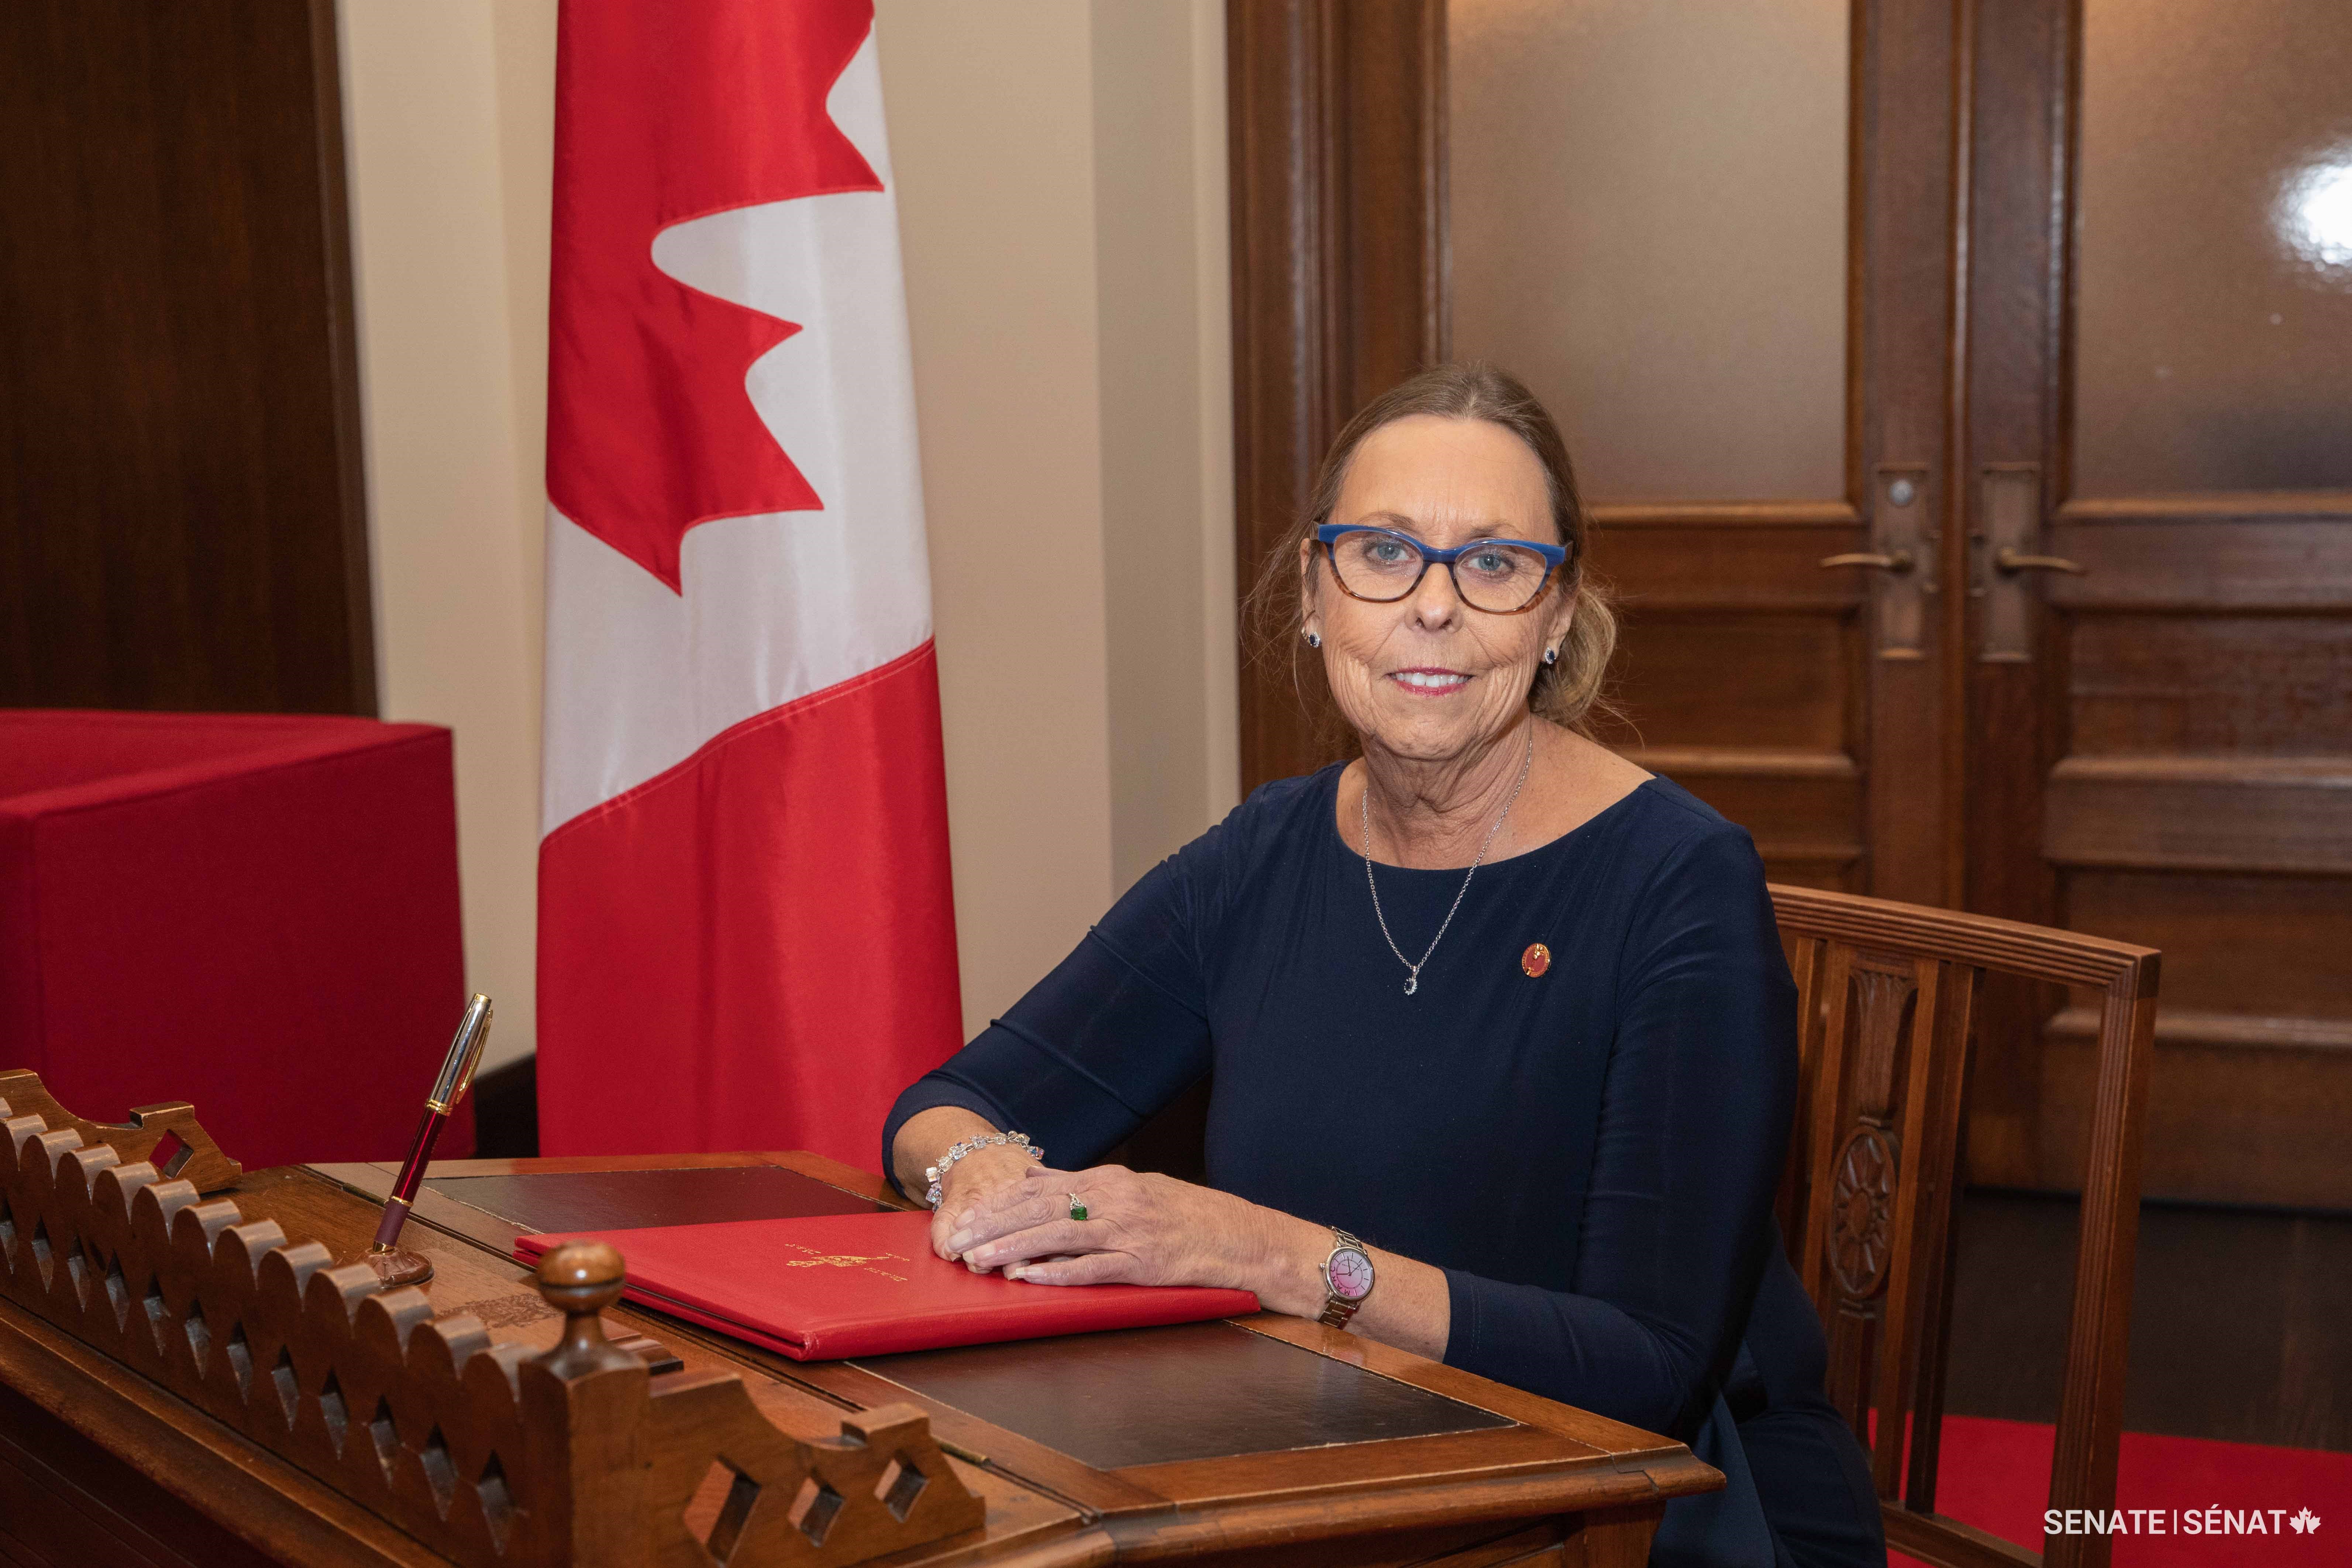 Senator Judith Keating, was appointed to the Senate of Canada on January 31, 2020. The accomplished constitutional lawyer represented the province of New Brunswick in the Red Chamber.